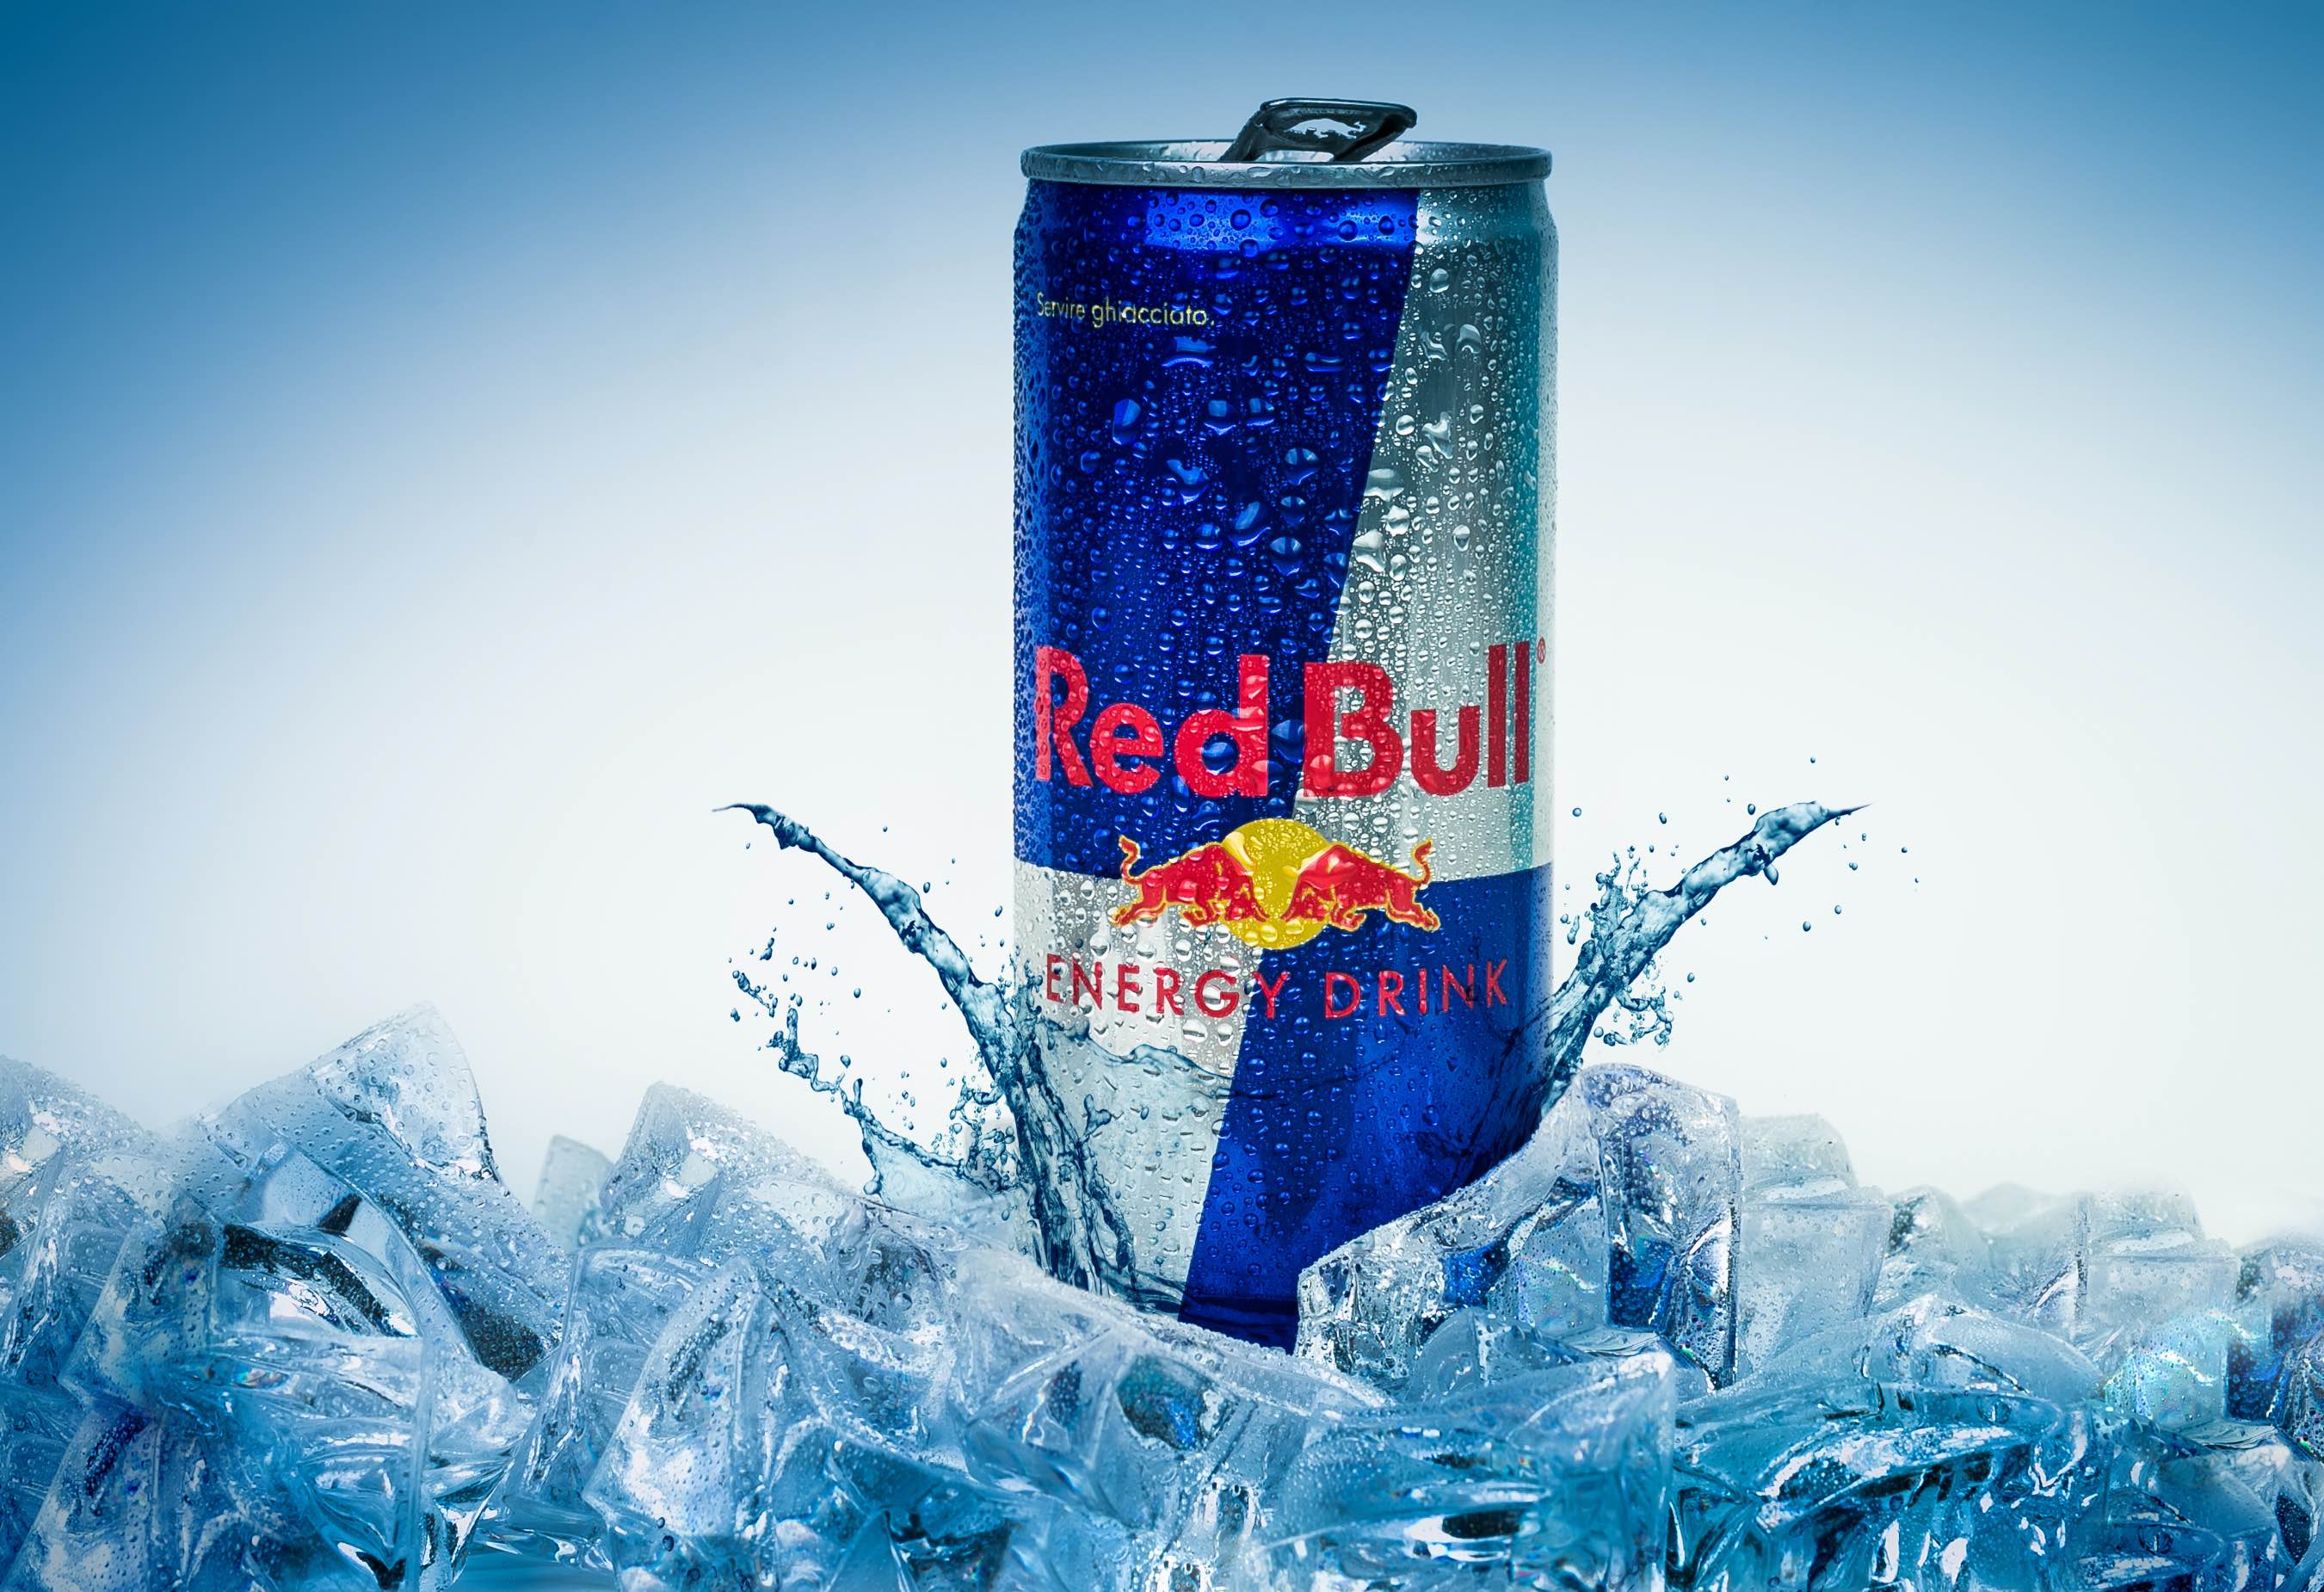 10 Red Bull Nutrition Facts You Need Know to